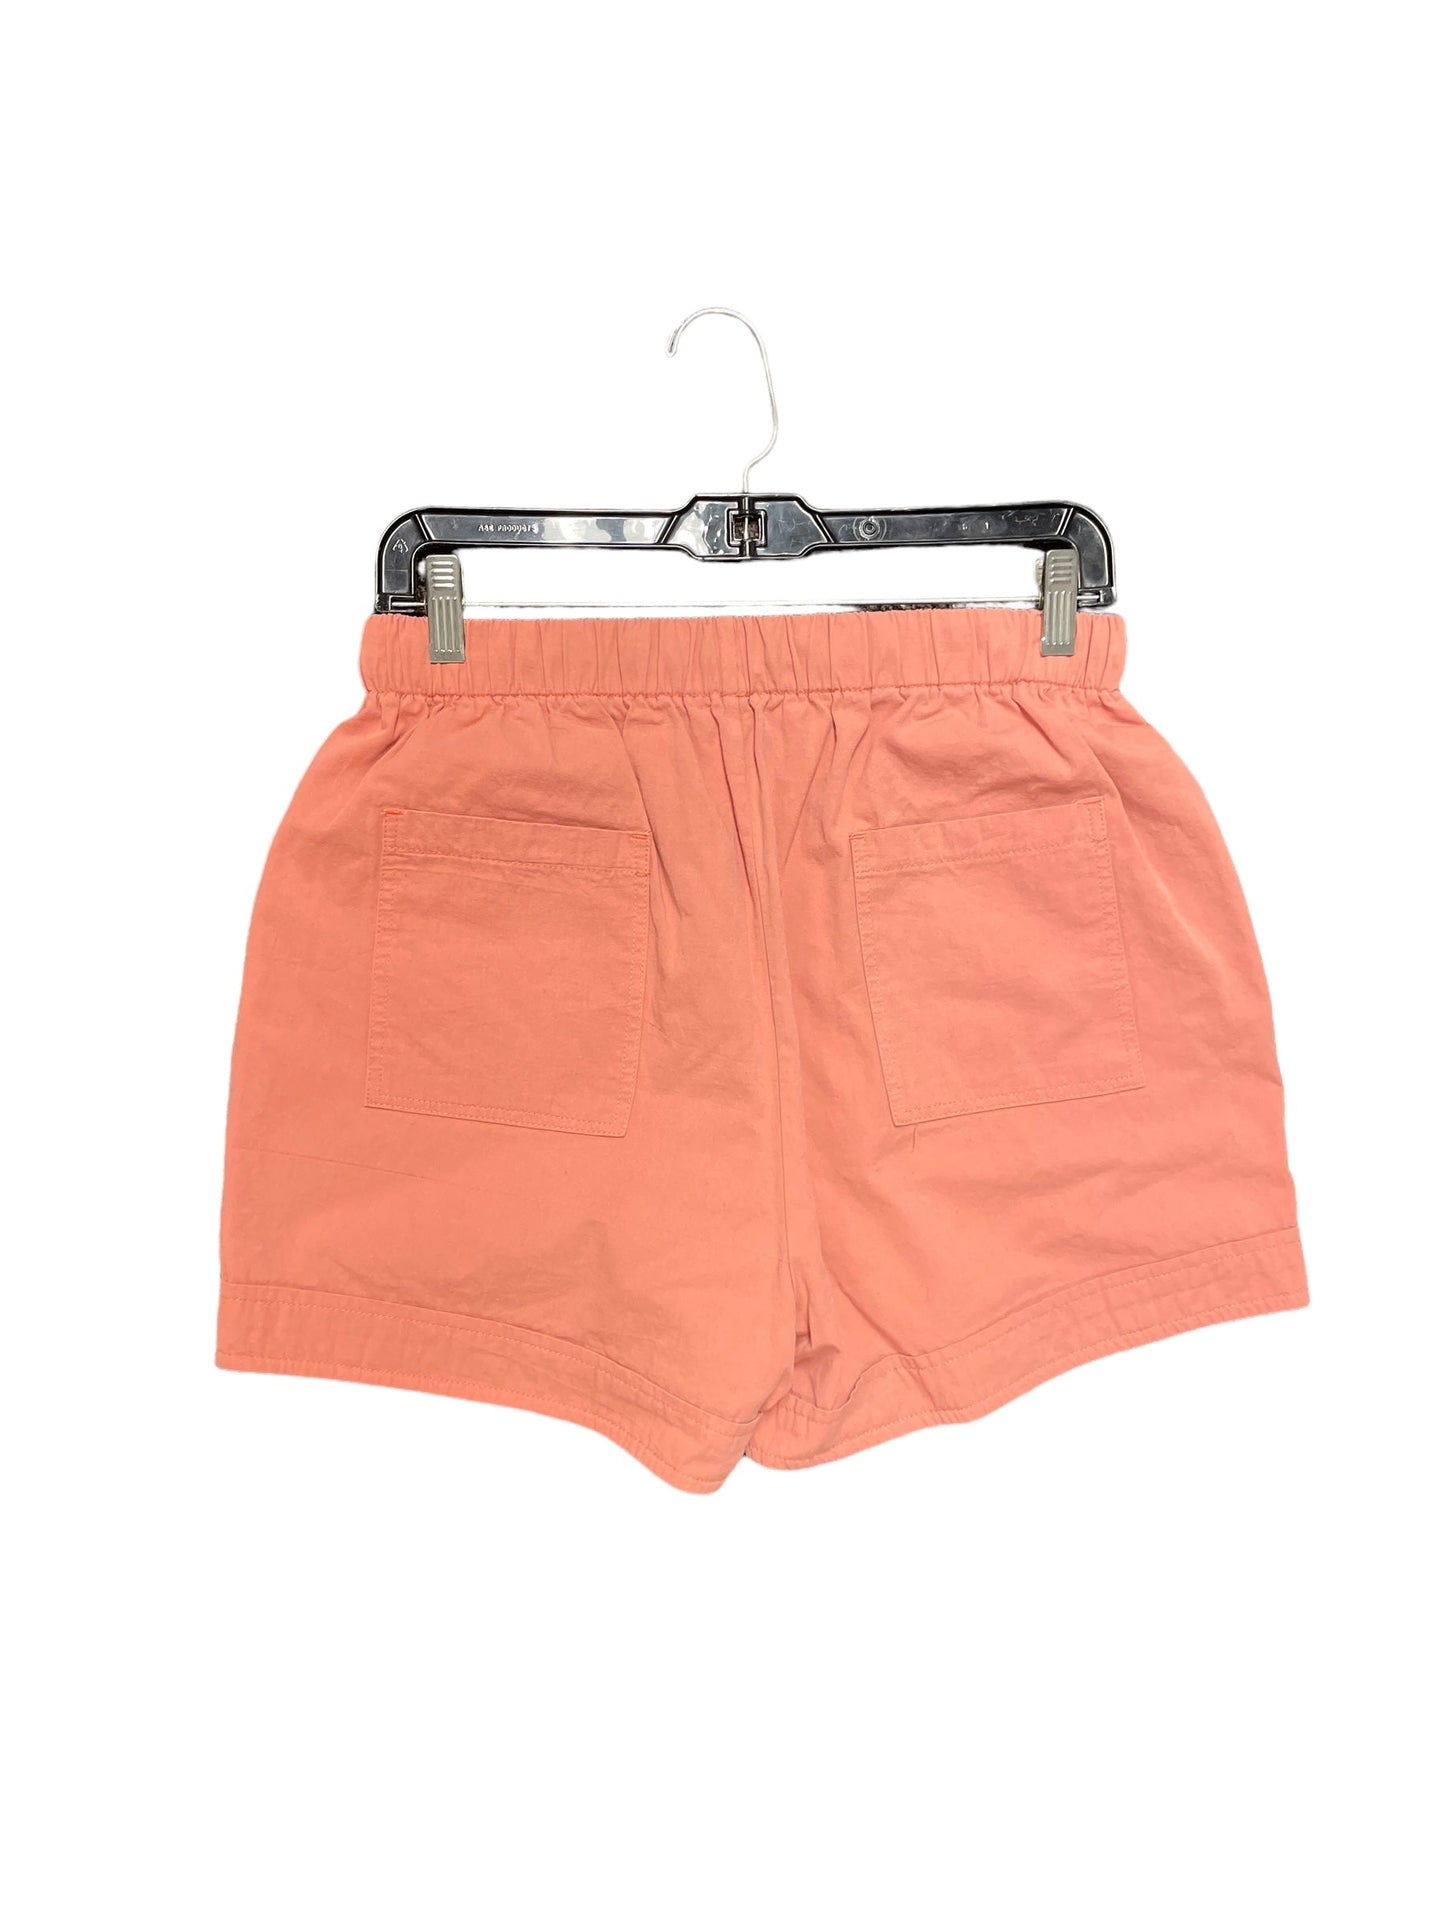 Pink Shorts Clothes Mentor, Size M